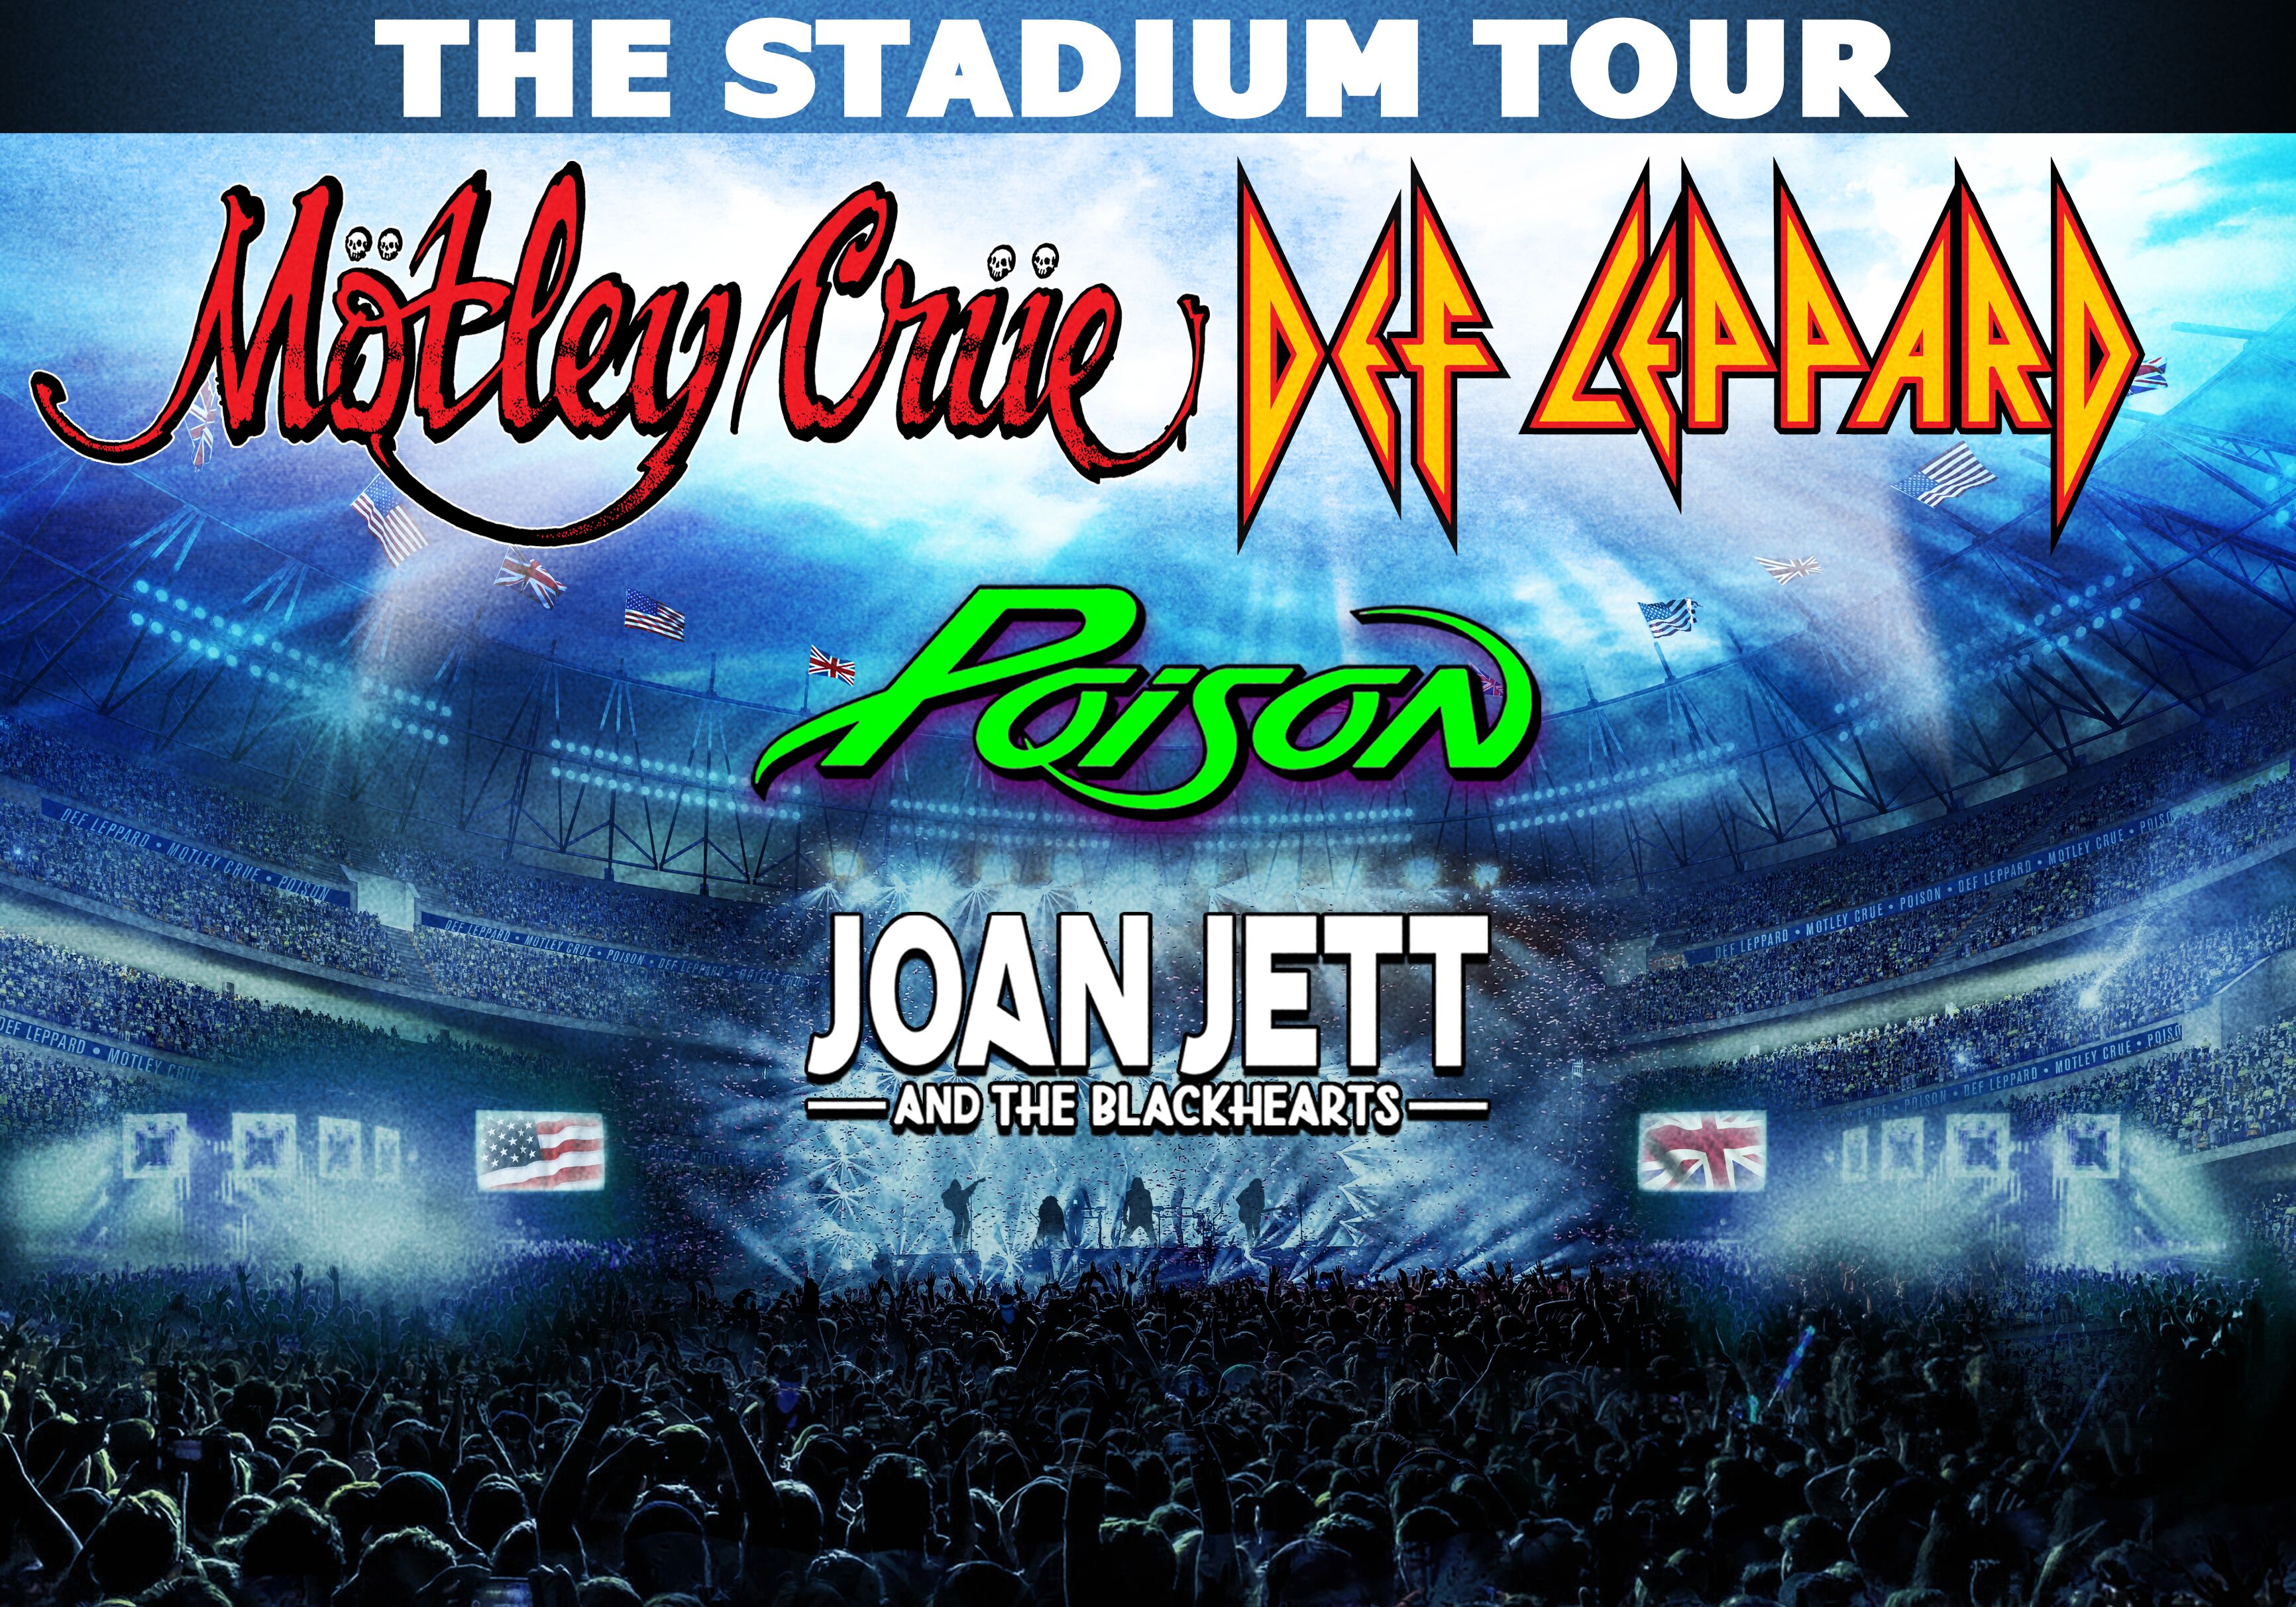 The Stadium Tour brings Motley Crue and Def Leppard back on stage